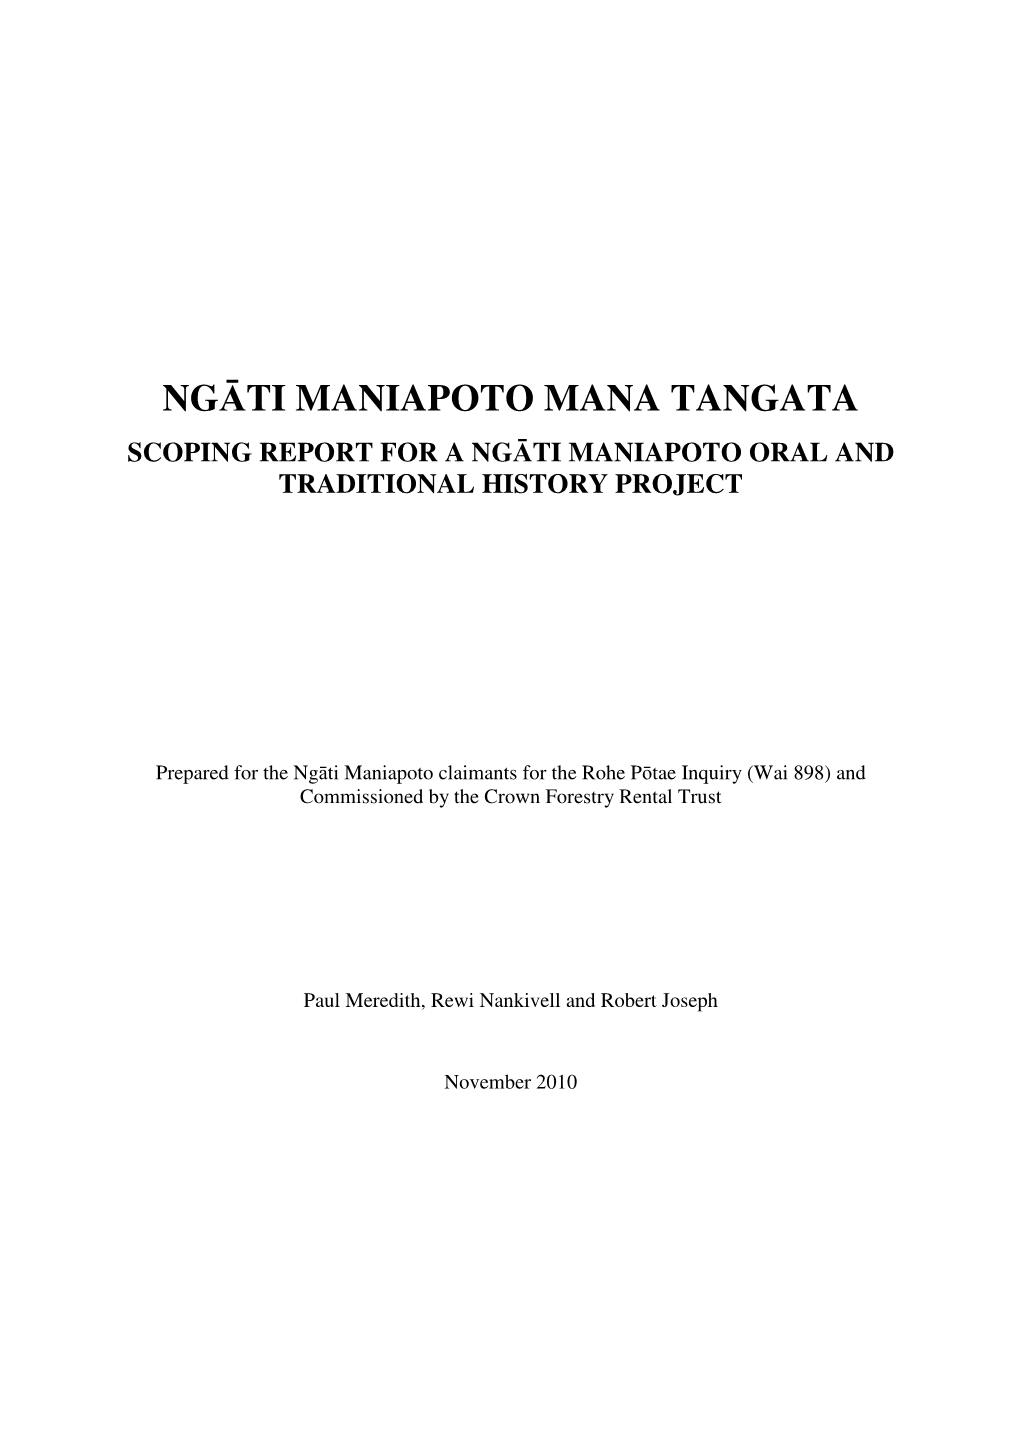 Ngāti Maniapoto Mana Tangata Scoping Report for a Ng Āti Maniapoto Oral and Traditional History Project